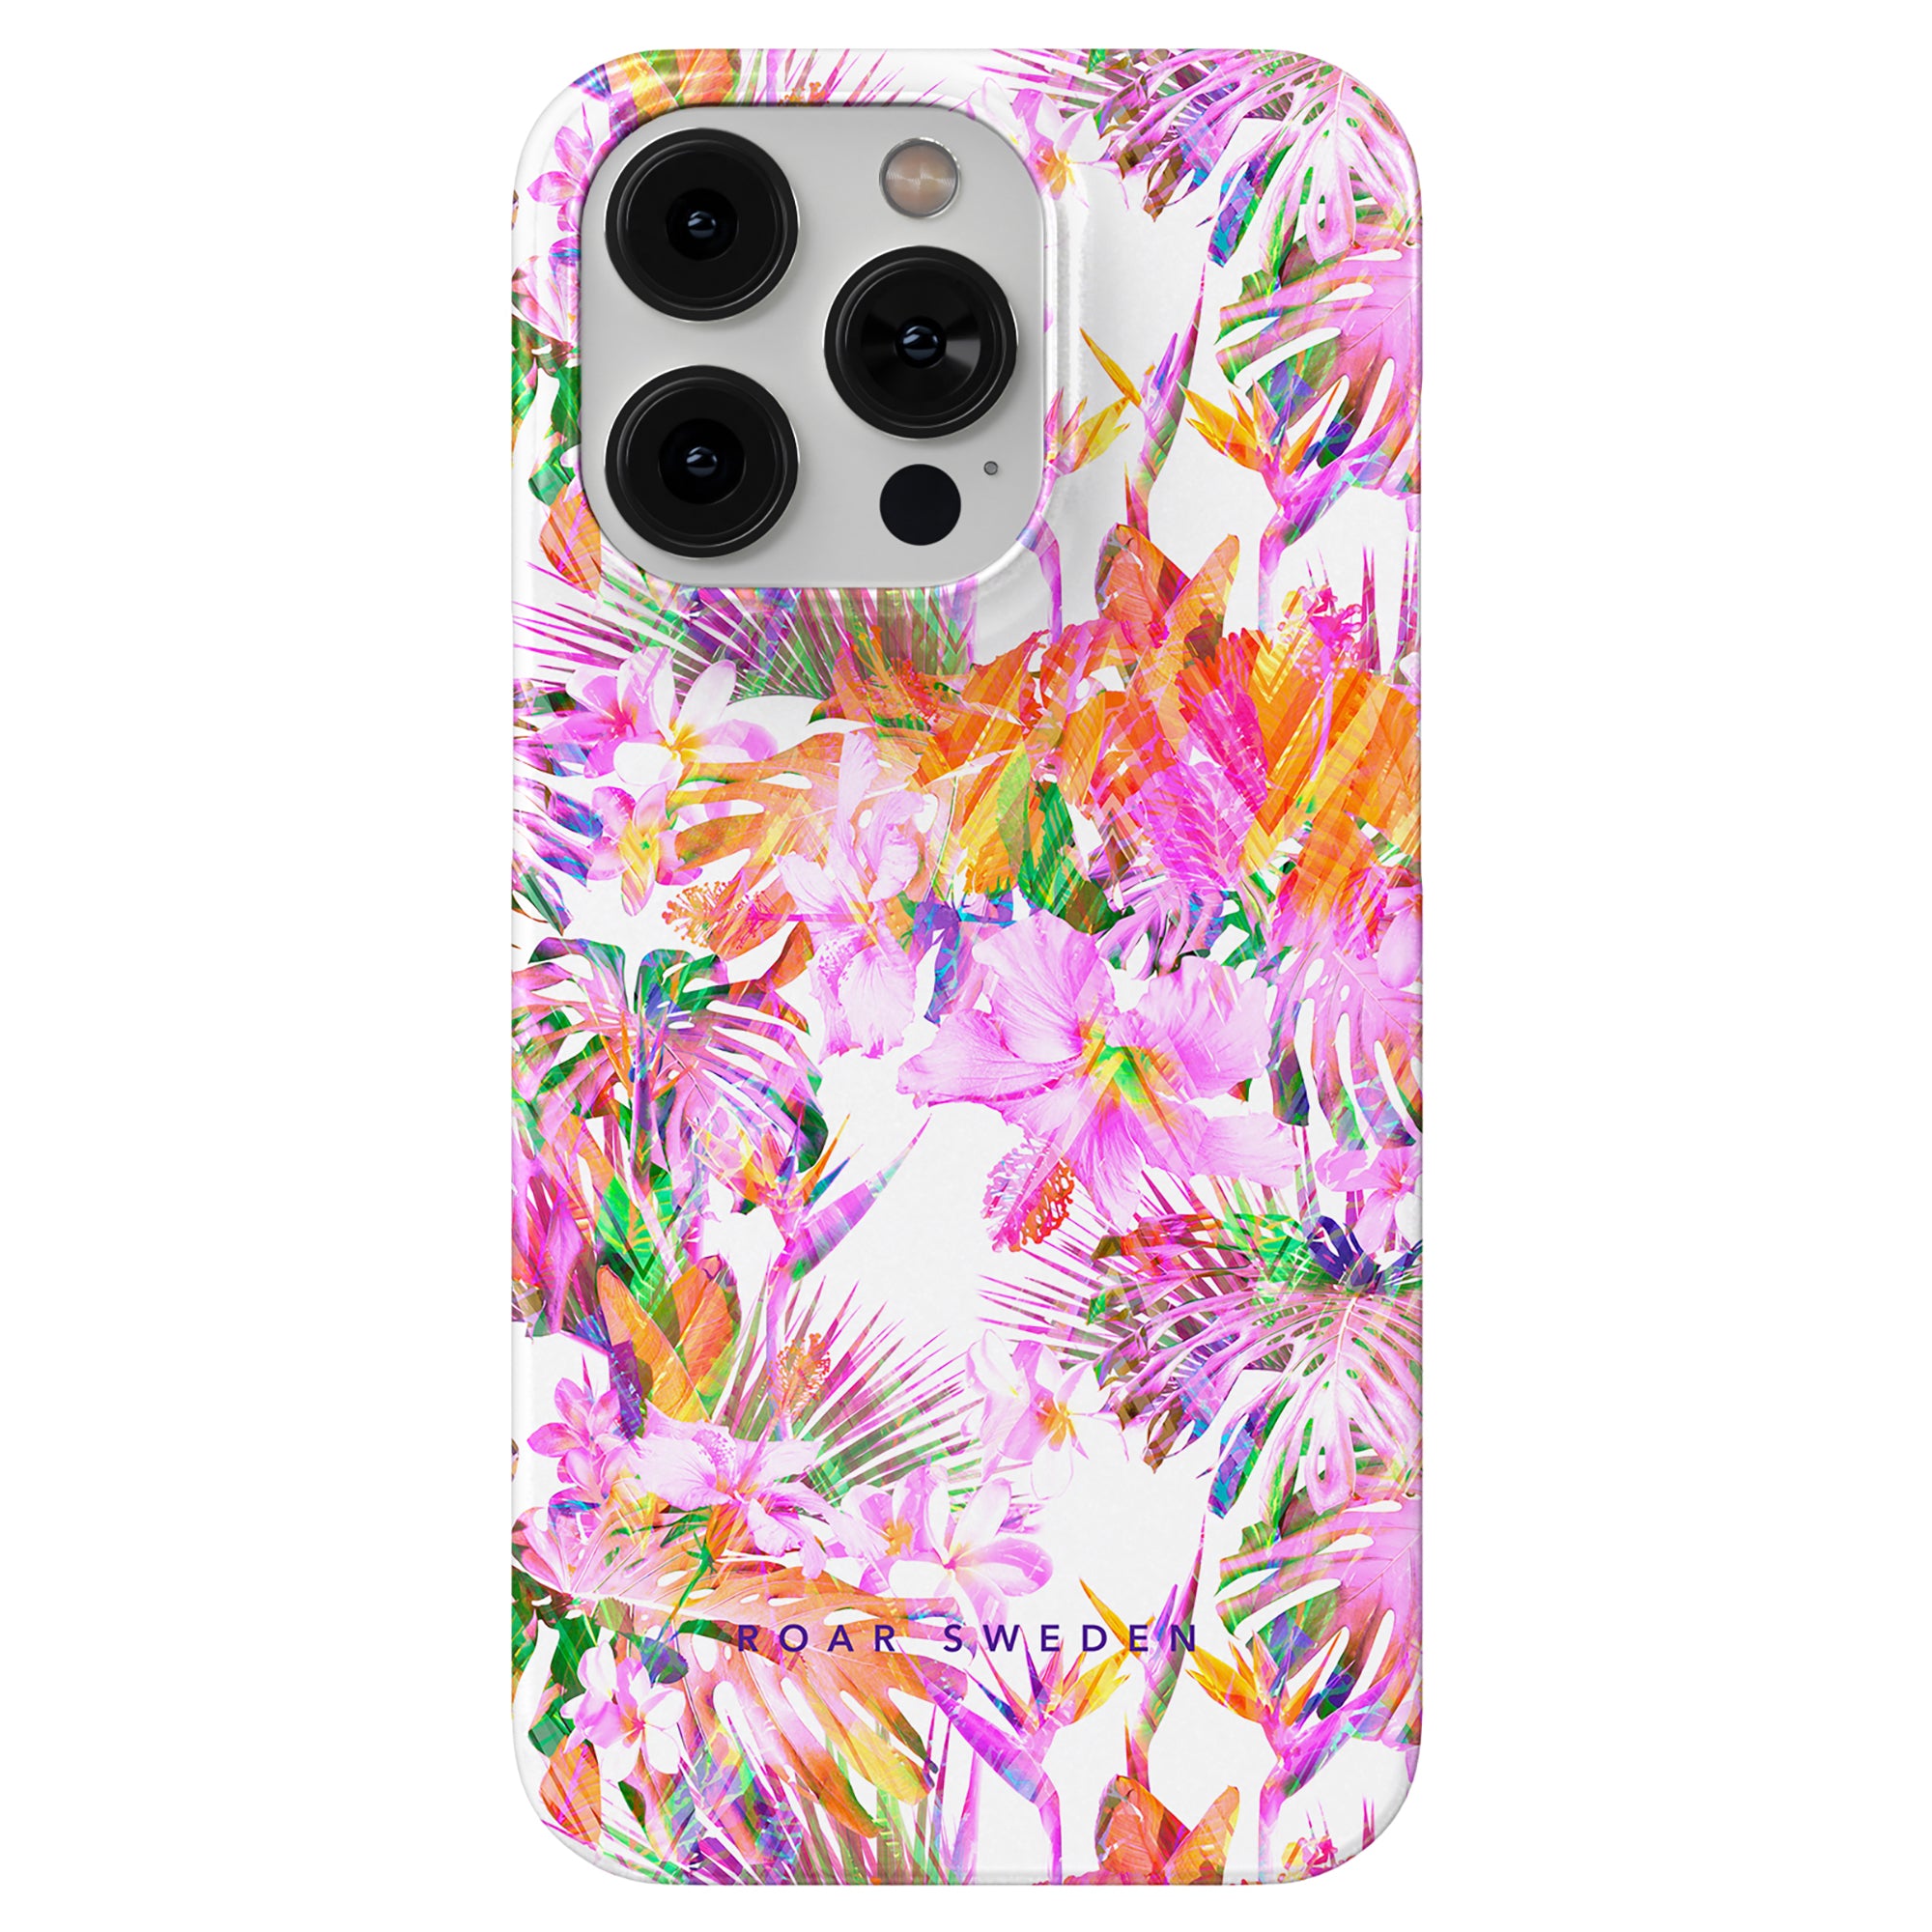 A vibrant Summer Vibe - Slim case with palm trees, perfect for a summer vibe.